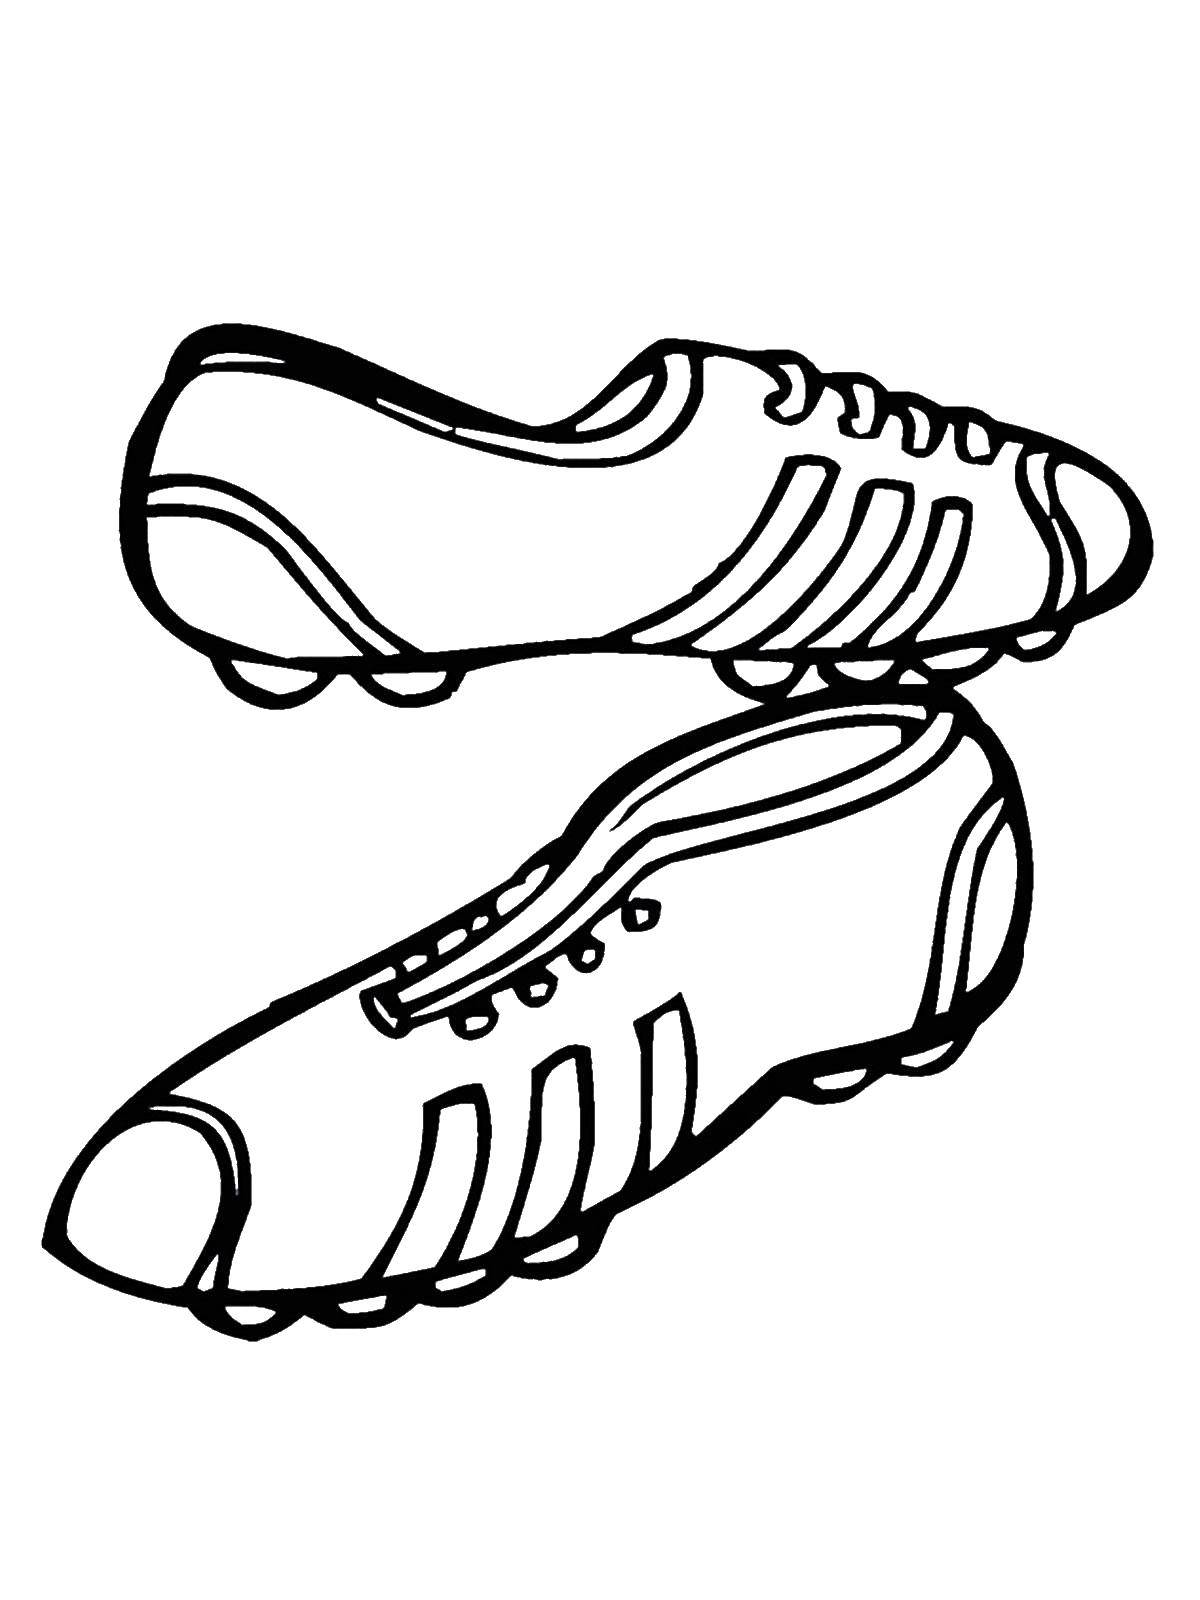 Coloring Cleats. Category Clothing. Tags:  shoes, sneakers, boots.